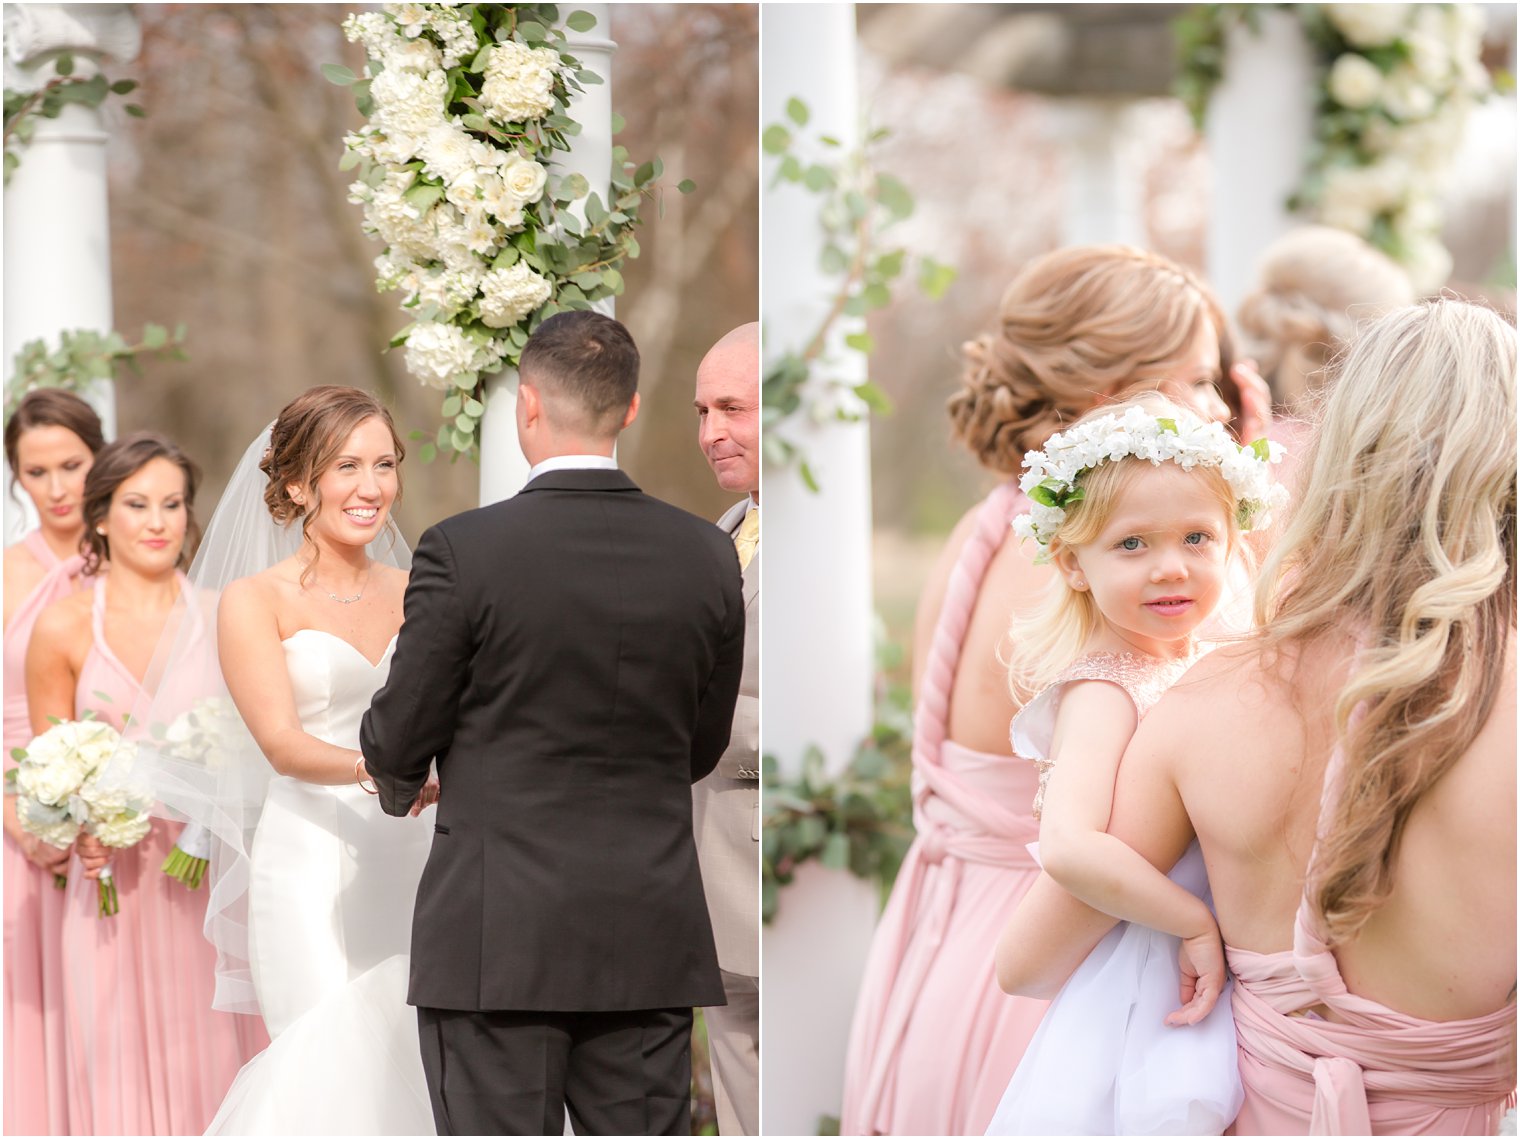 photos of bride and flower girl in outdoor wedding with lots of florals